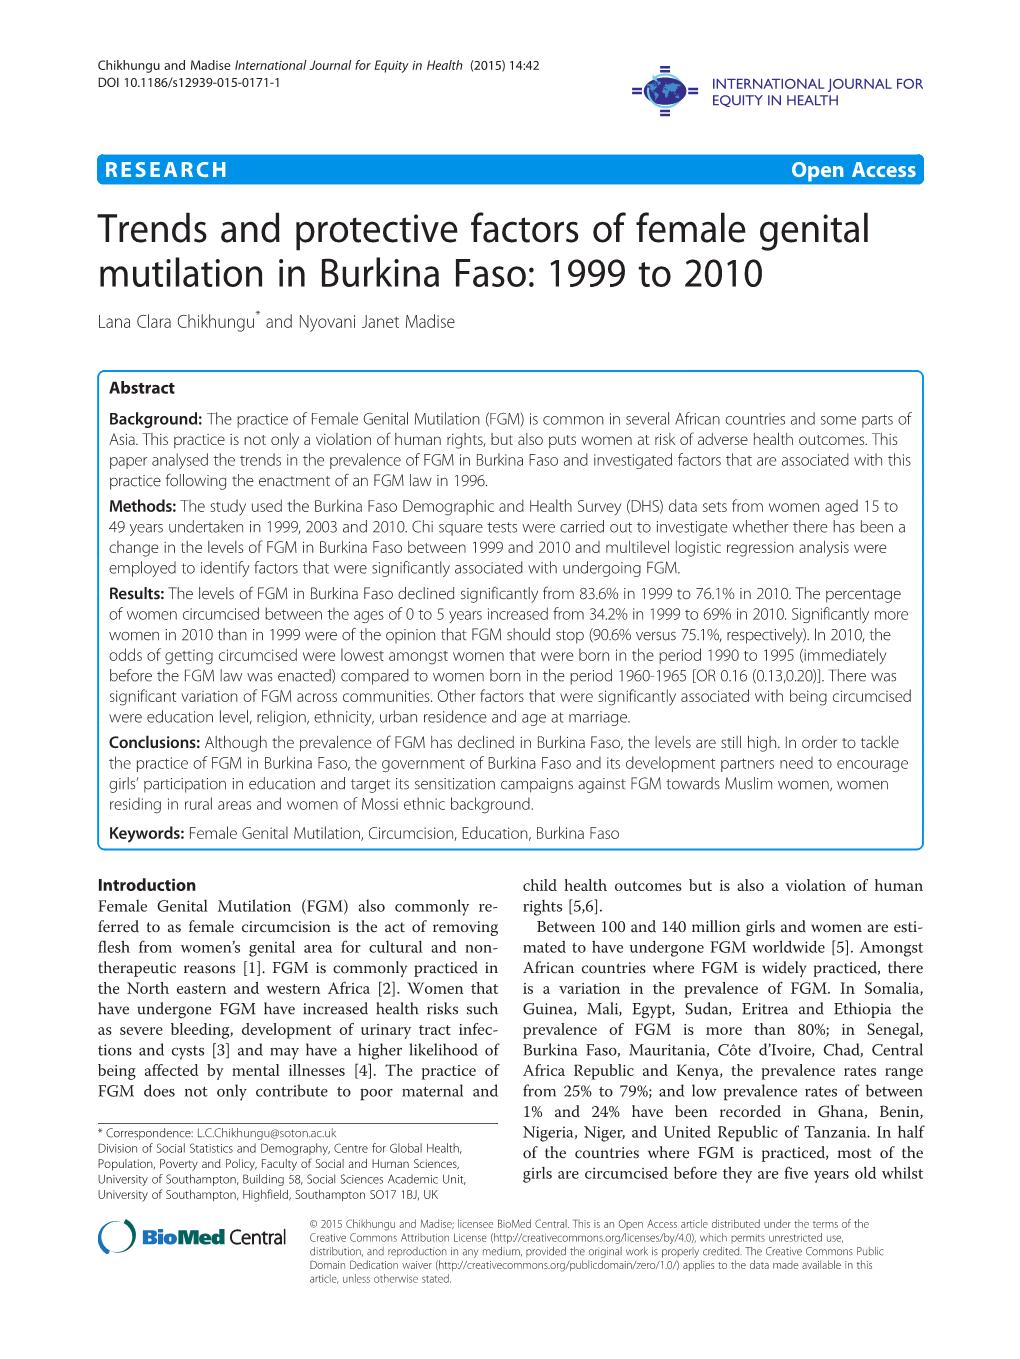 Trends and Protective Factors of Female Genital Mutilation in Burkina Faso: 1999 to 2010 Lana Clara Chikhungu* and Nyovani Janet Madise